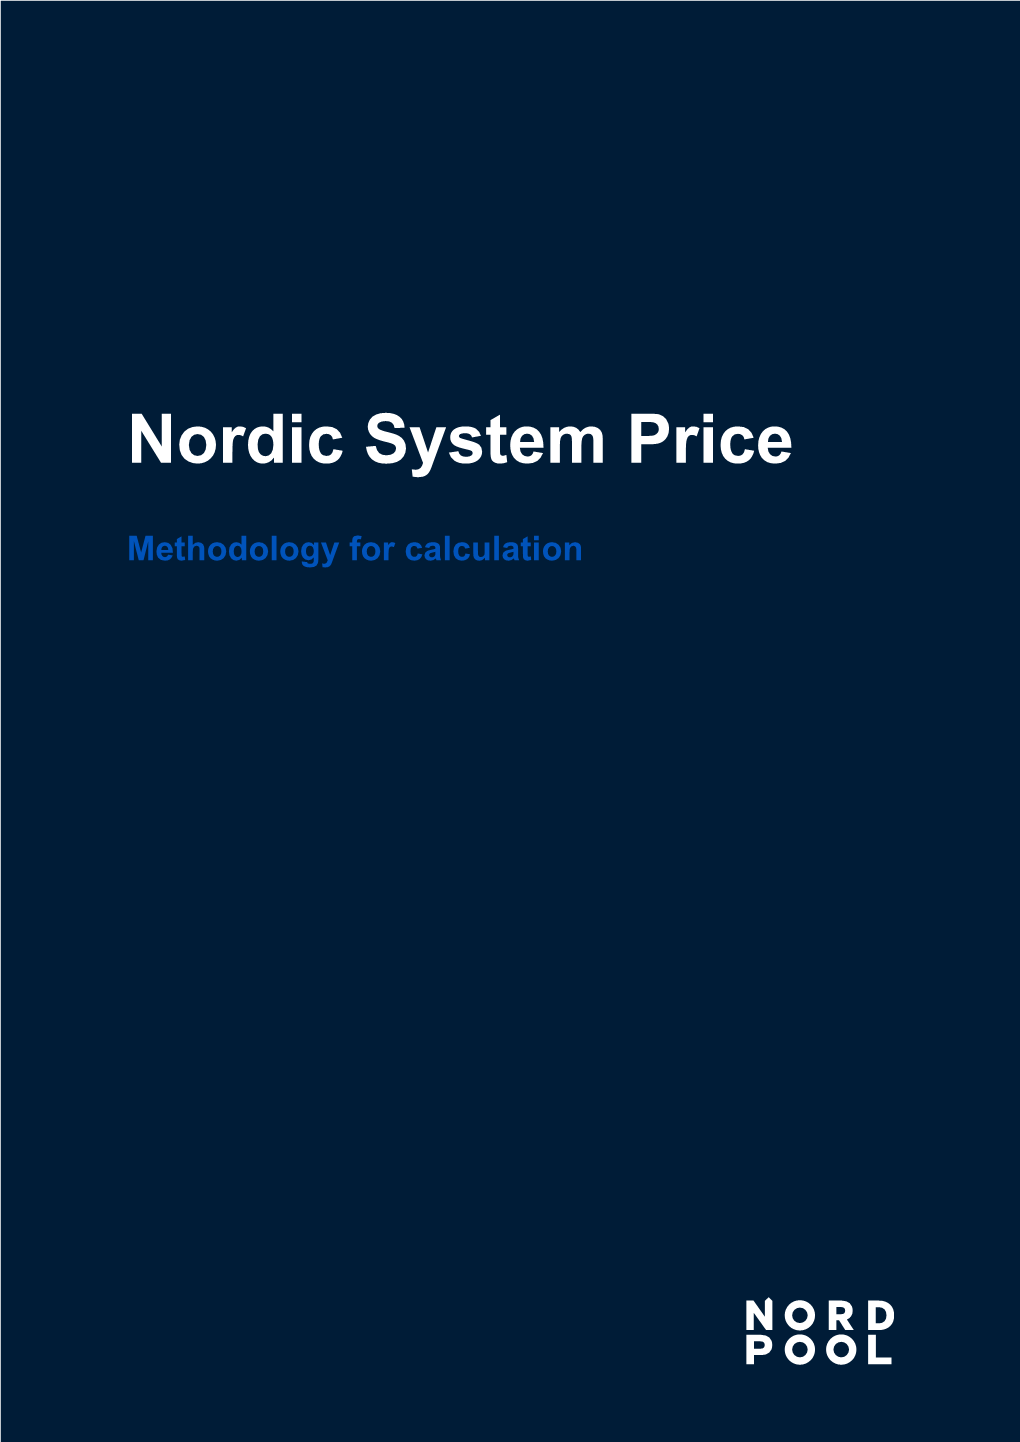 Methodology for Calculating Nordic System Price